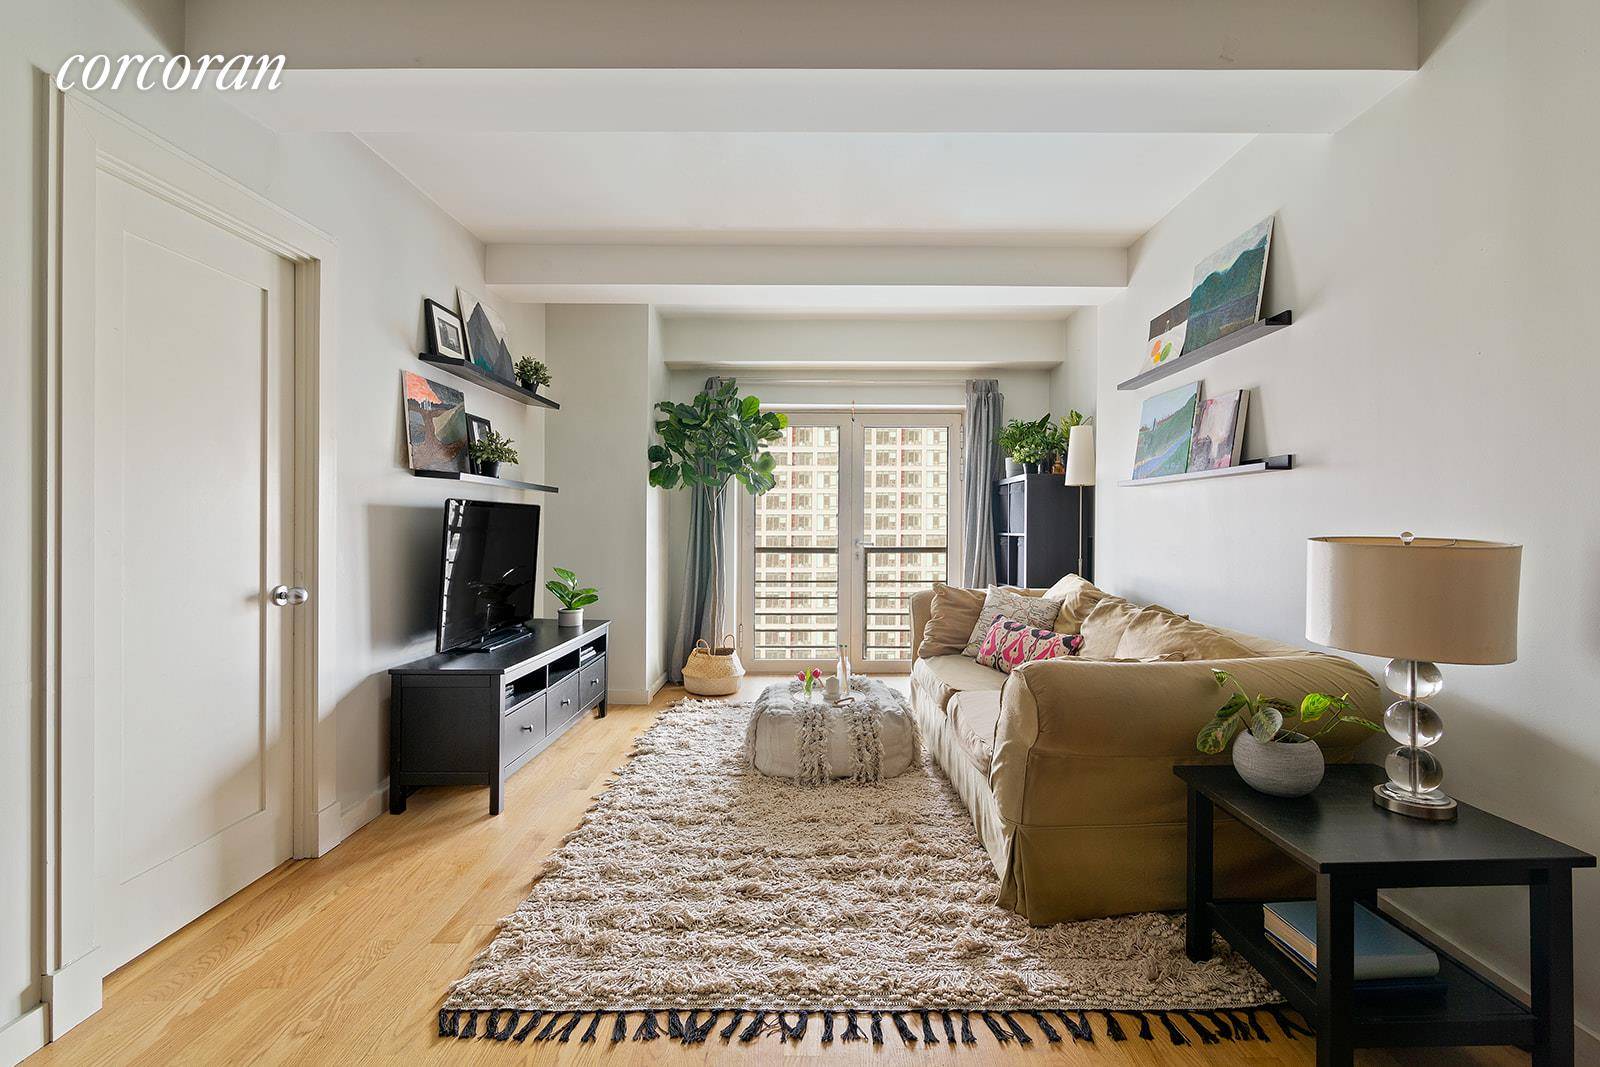 302 2nd Street, 5D Sunshine and city views await in this conveniently located corner 2 bedroom 2 bath condo in North Park Slope.